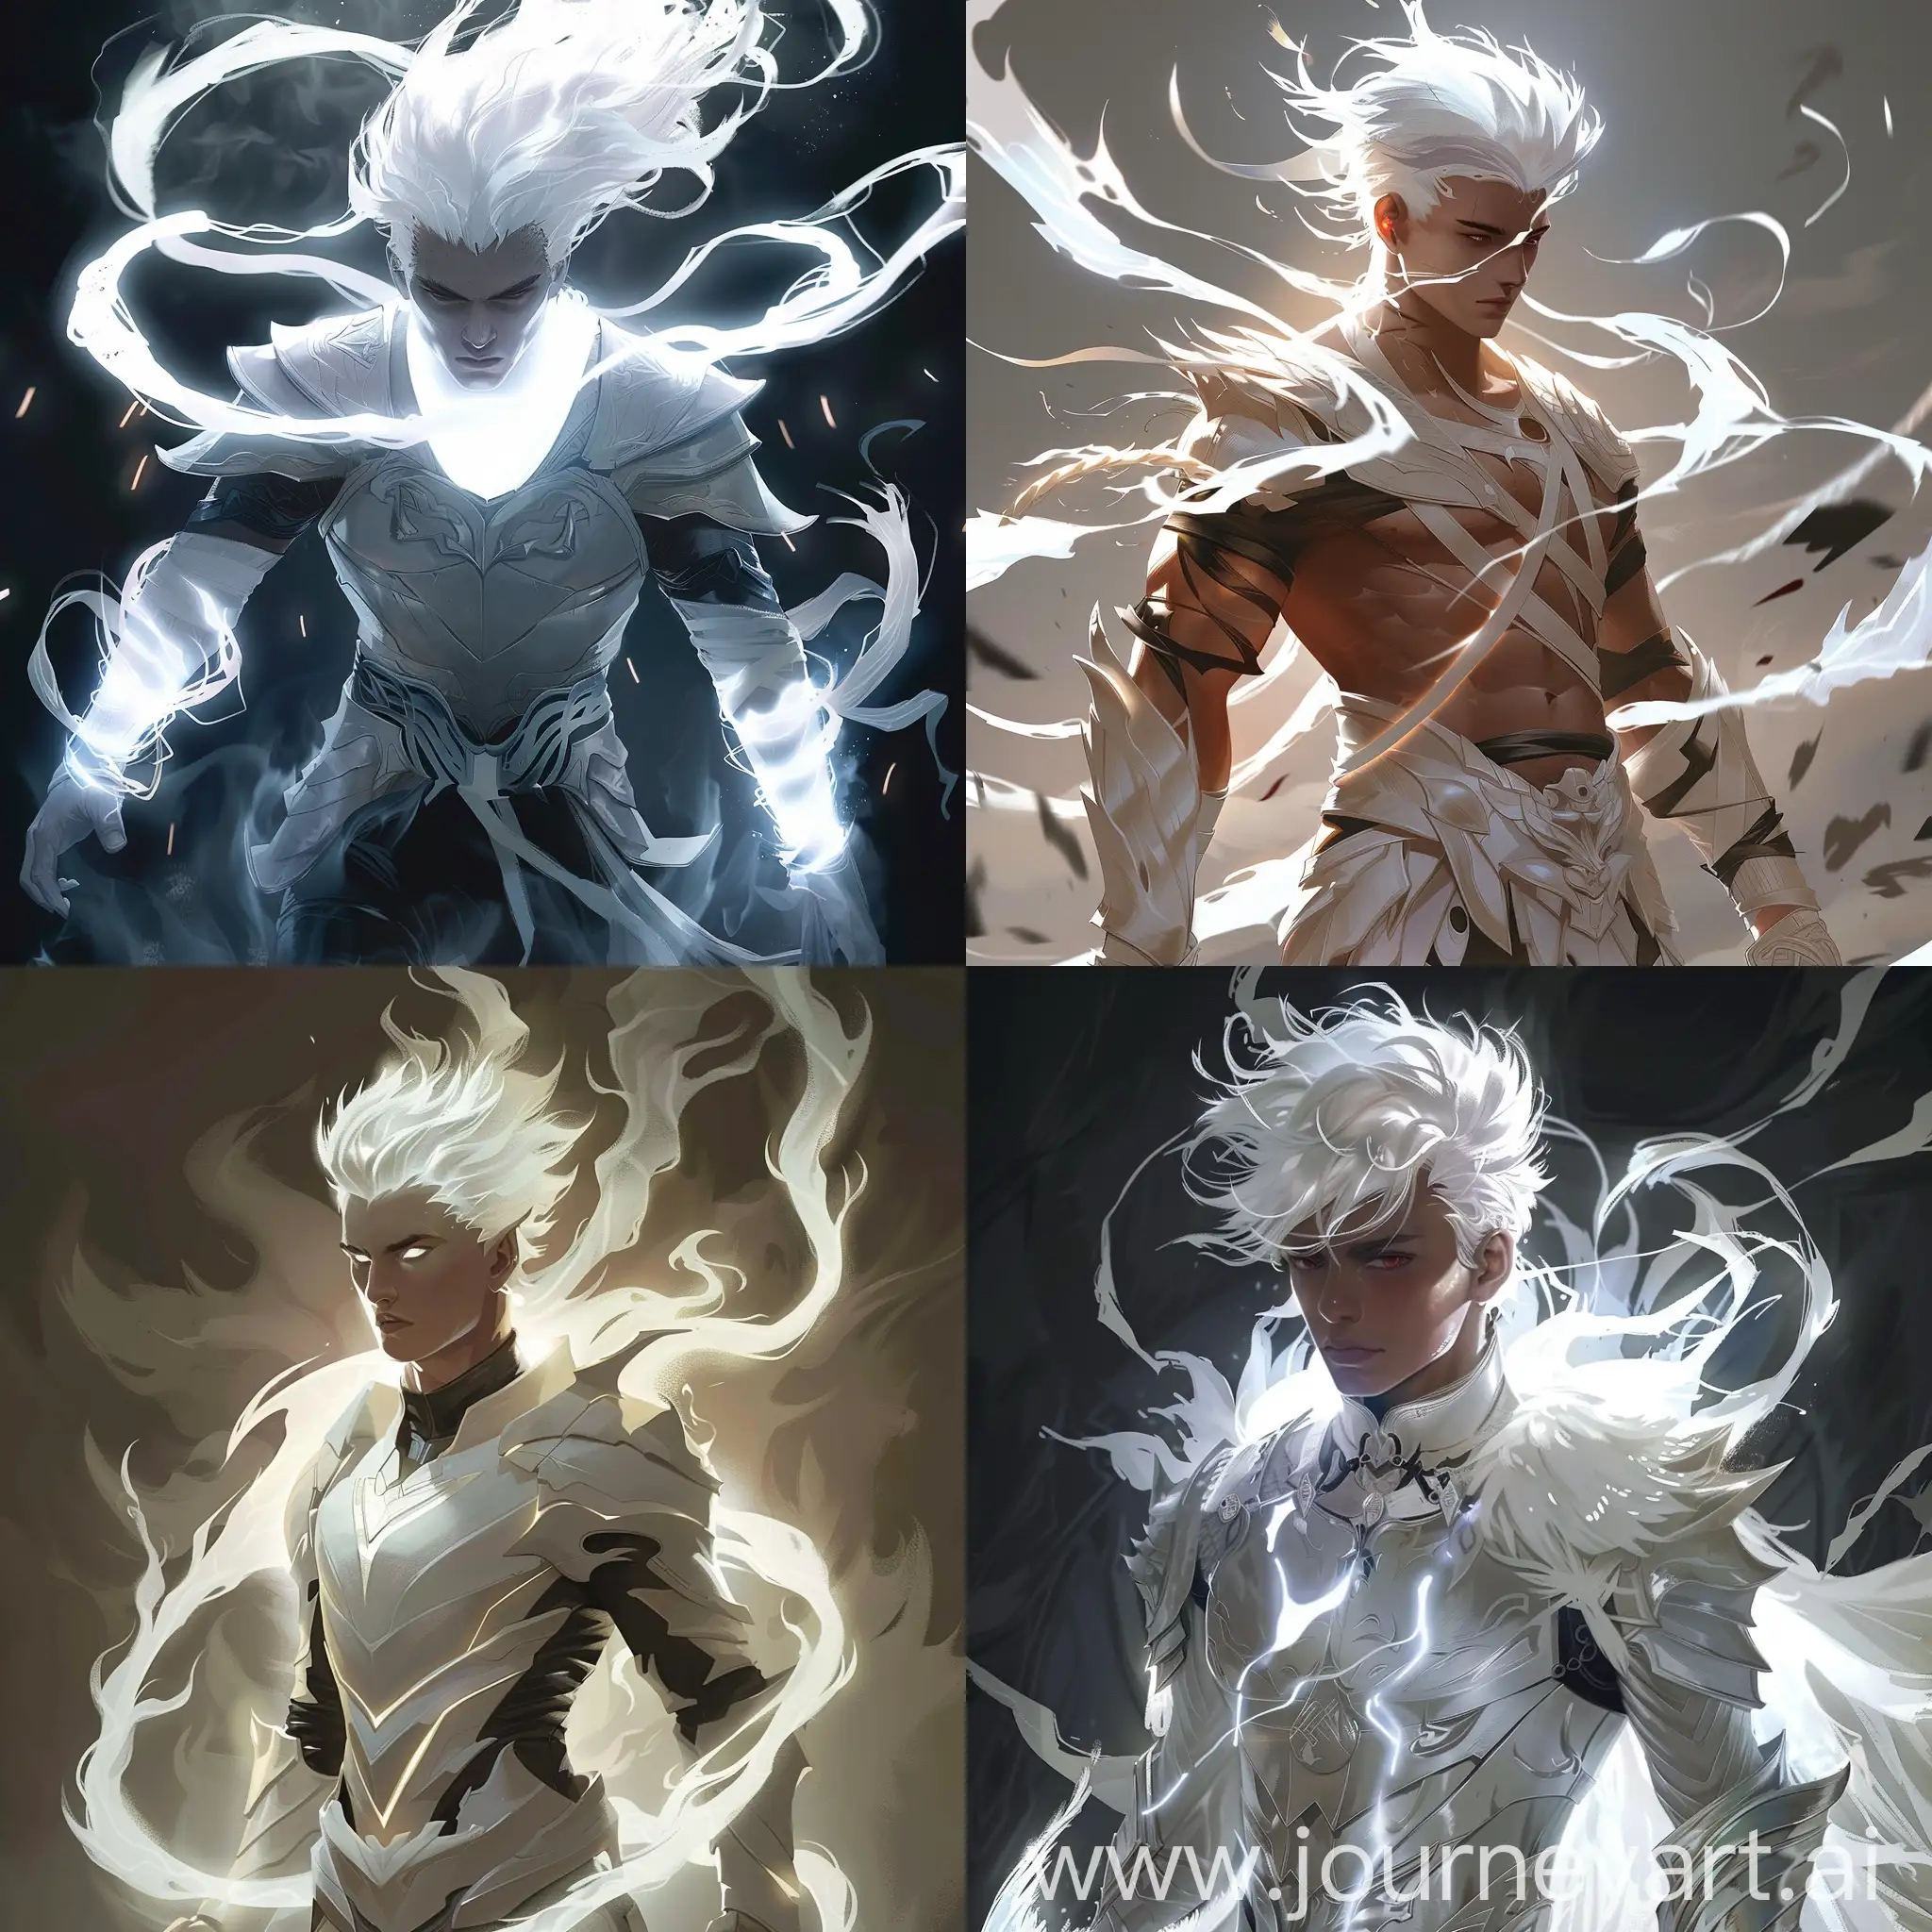 Mythical-Warrior-with-Glowing-White-Hair-in-Anime-Battle-Stance